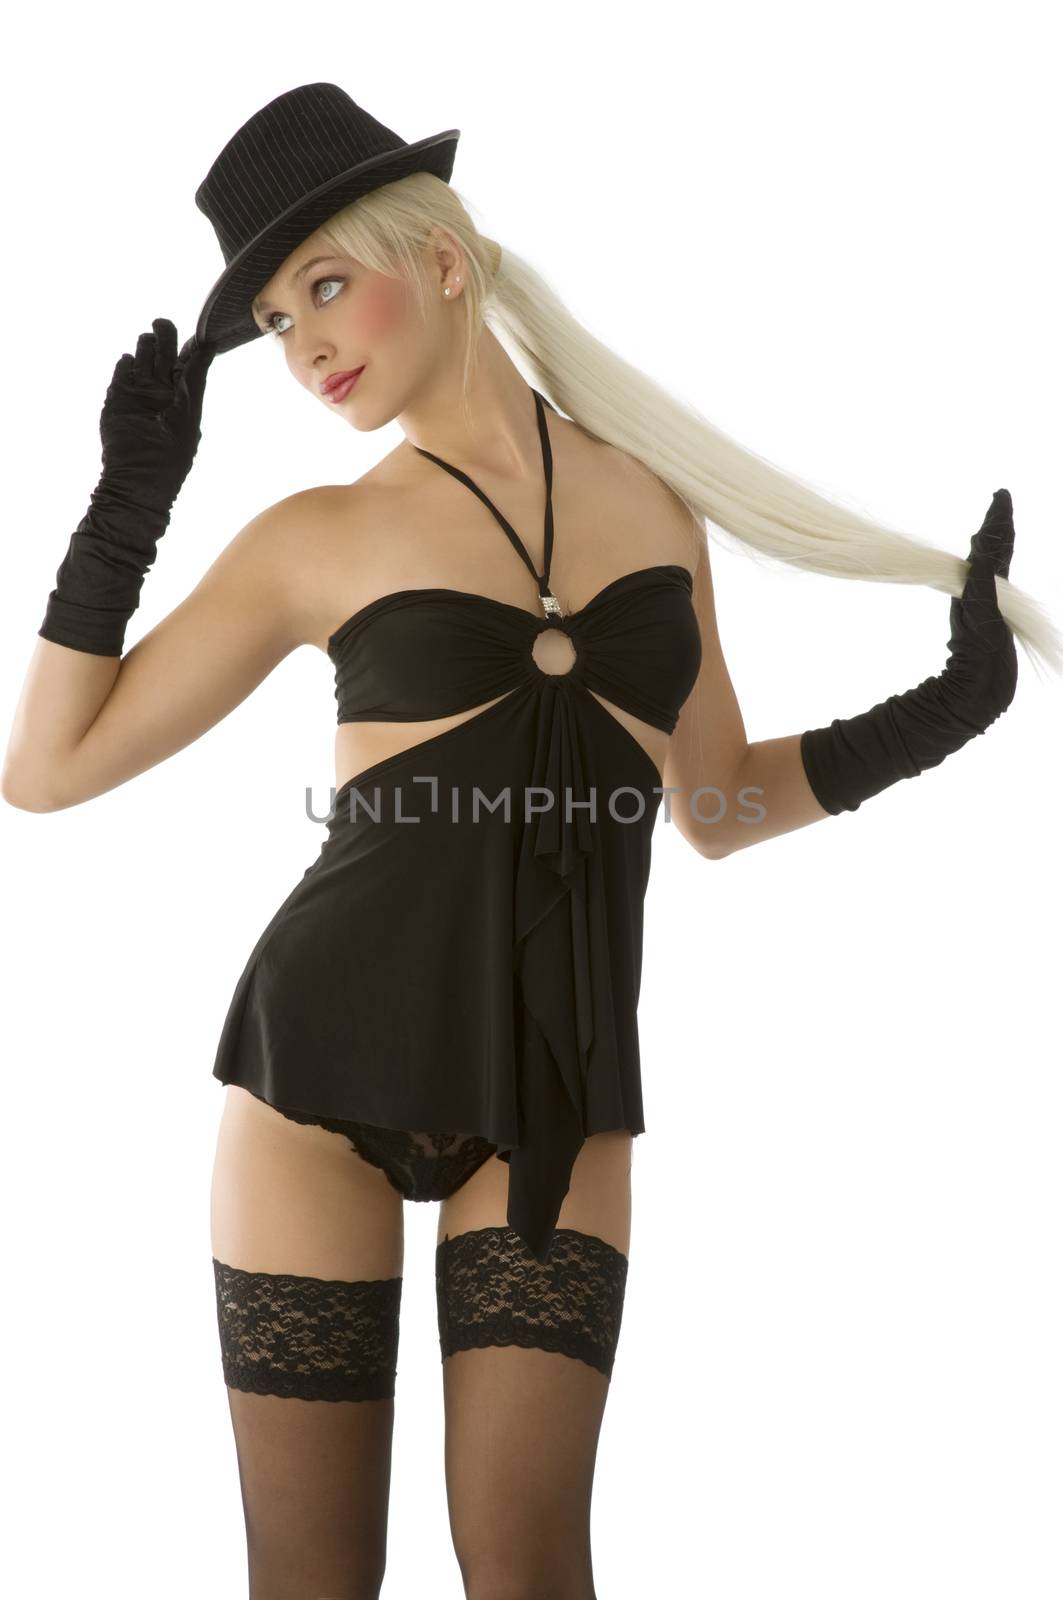 sensual blond girl with black hat gloves and stocking